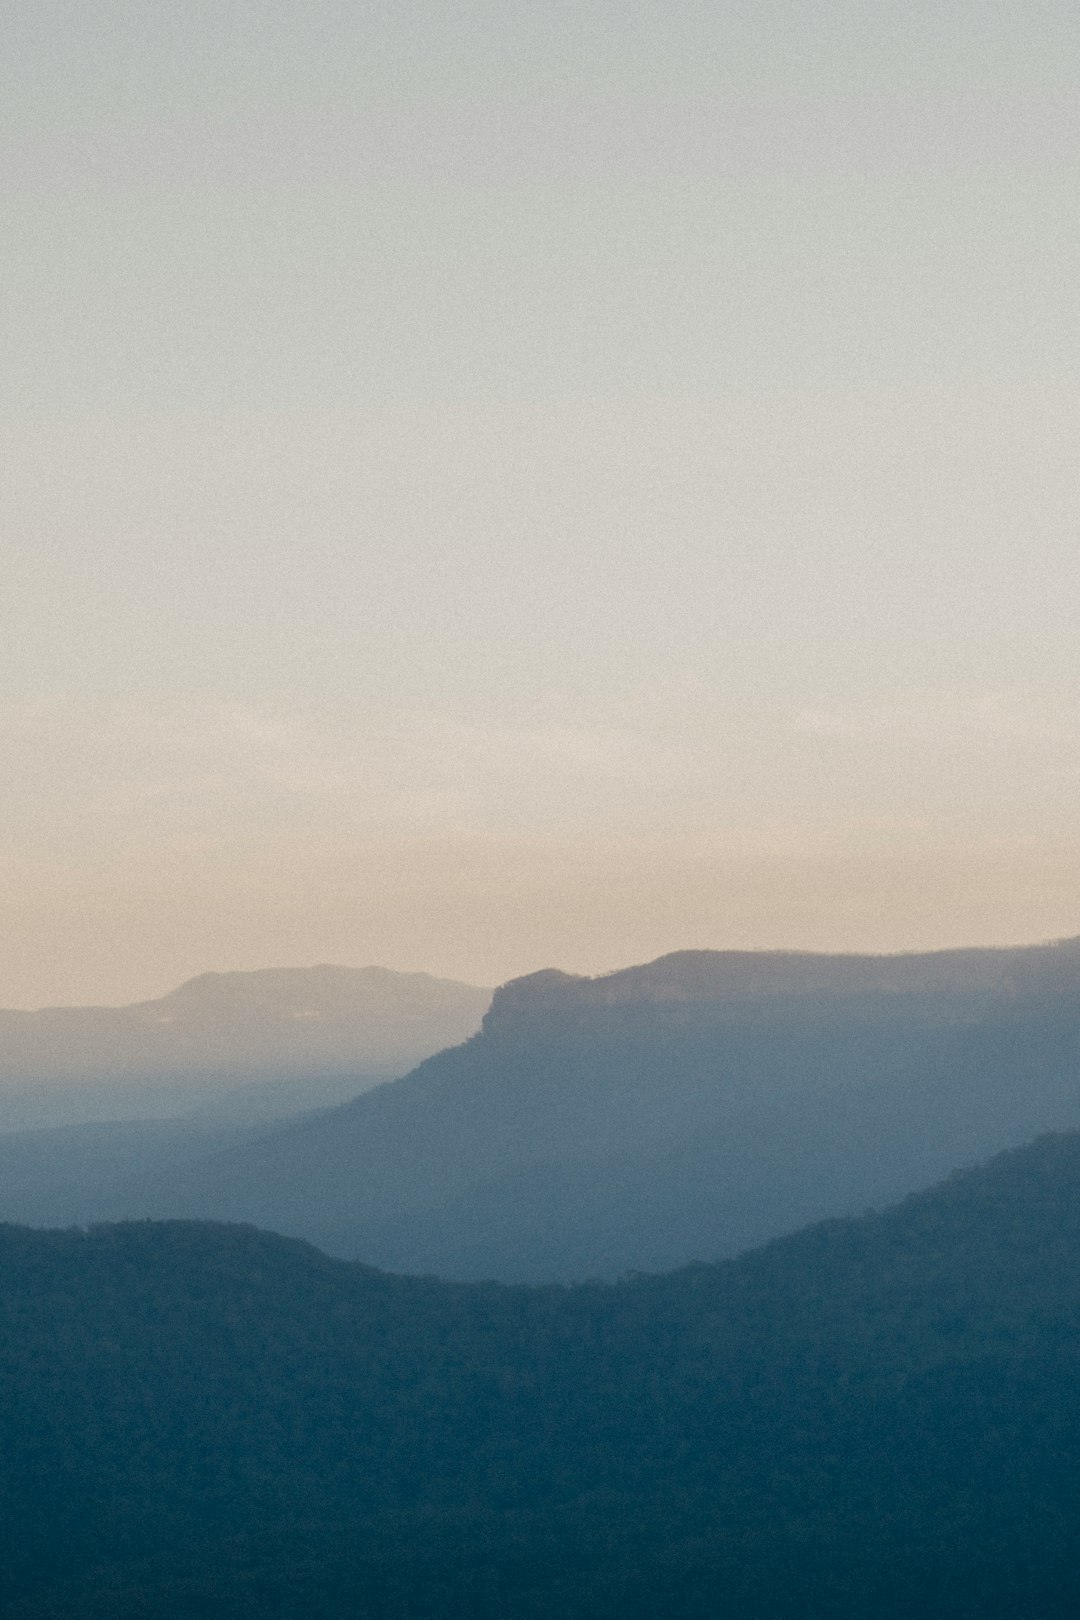 travelers stories about Hill in Blue Mountains NSW, Australia